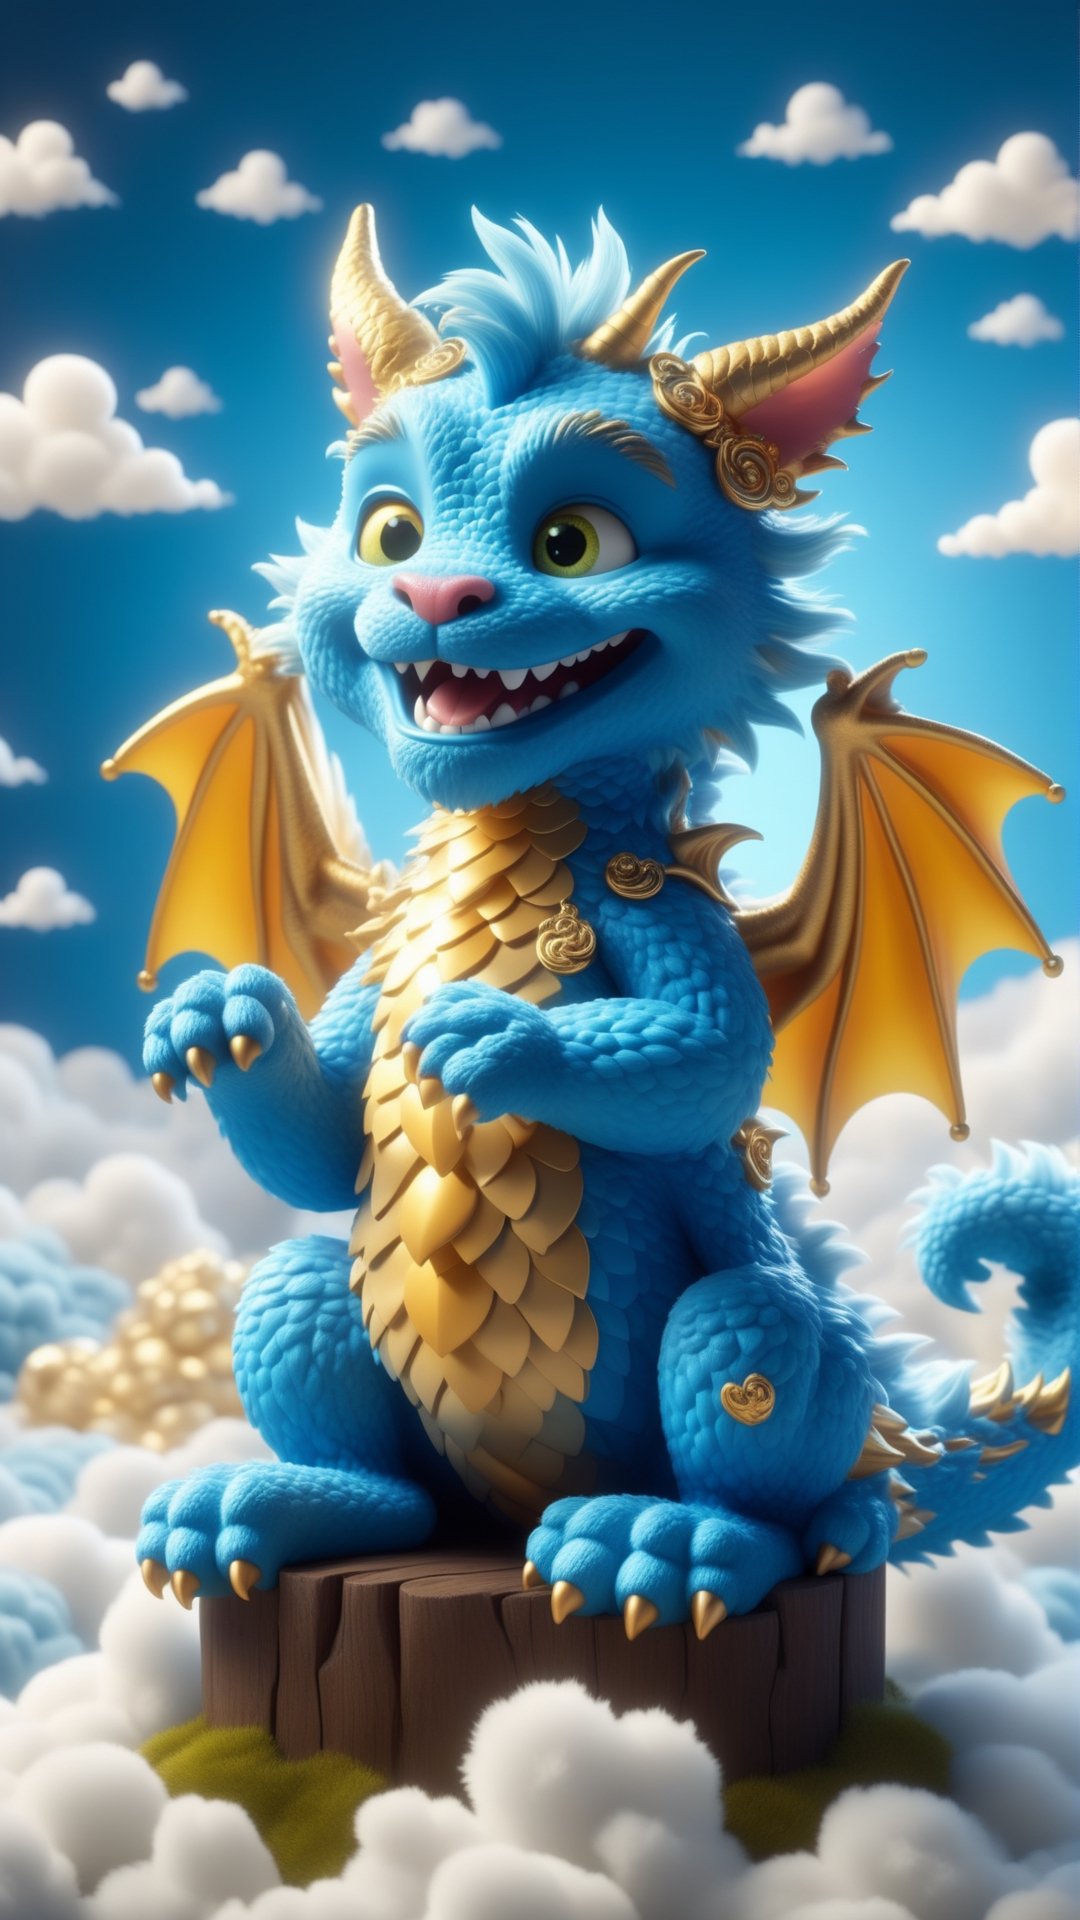 Pixar anime movie scene style, the cute fluffy little fuzzy blue dragon is sitting in clouds, in the style of mischievous feline motif, 8k 3d, unique yokai illustrations, white and gold, chromatic joy, furry art, fantastic grotesque